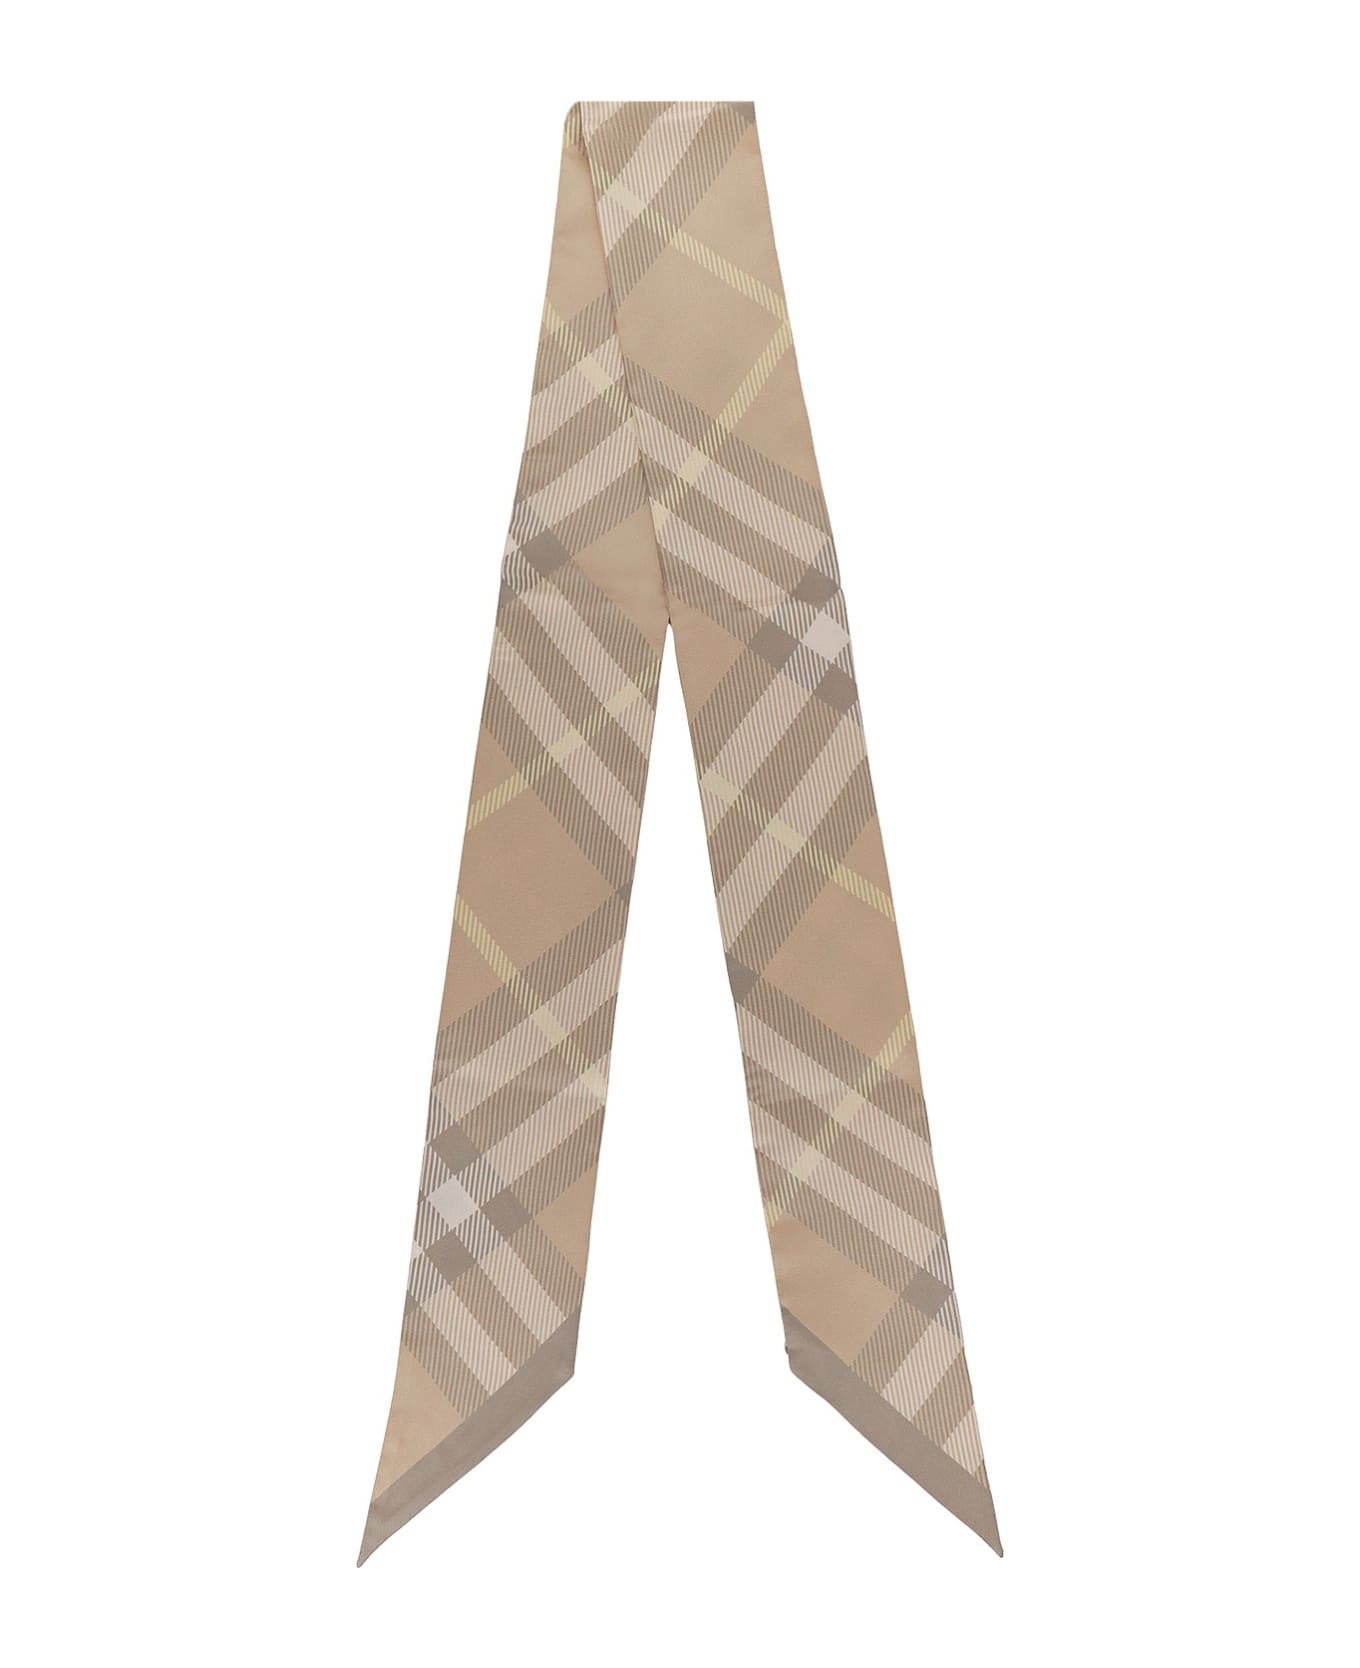 Burberry 'check' Thin Scarf - Beige